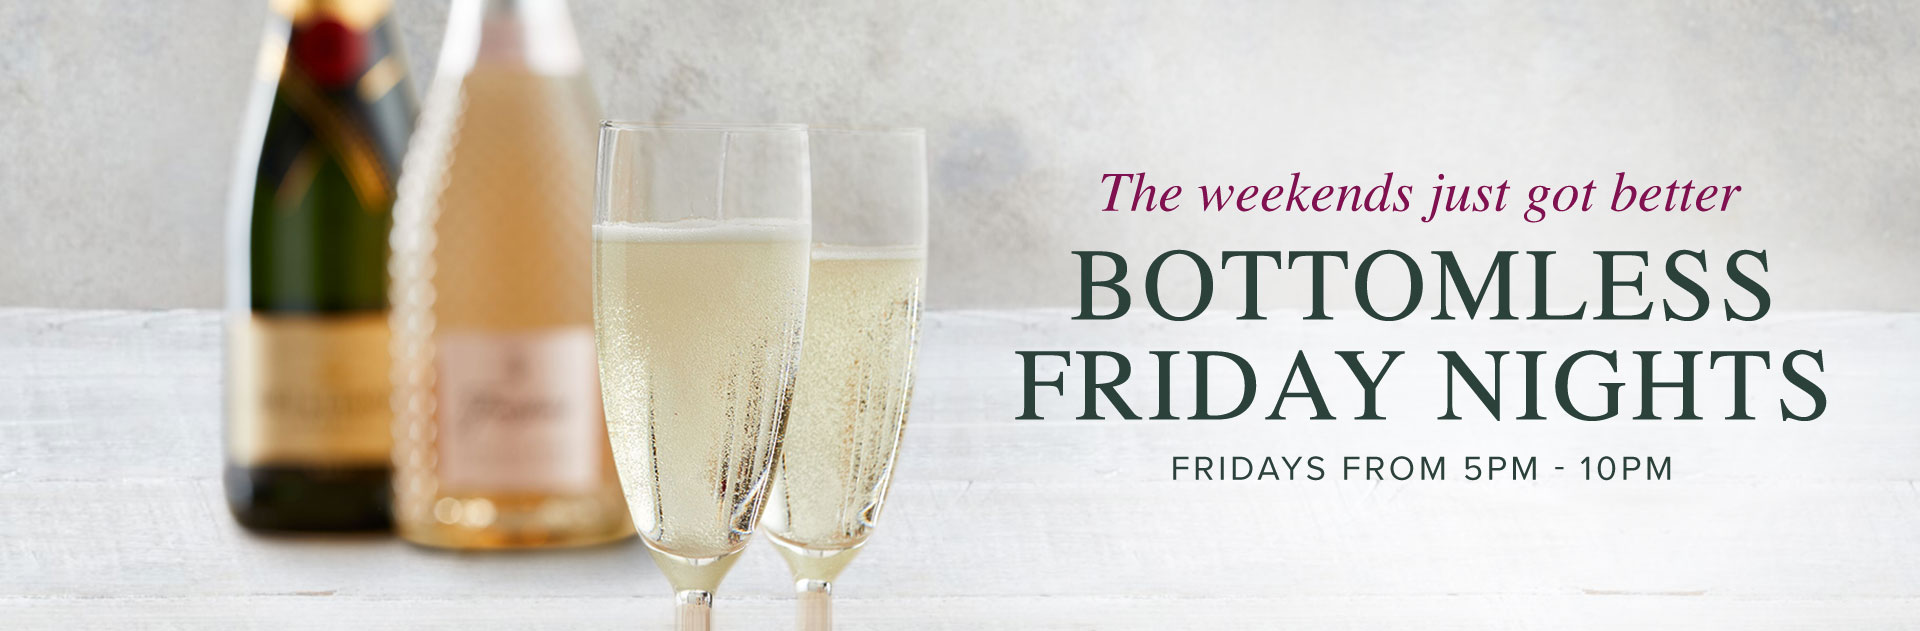 Bottomless Friday at The White Hart